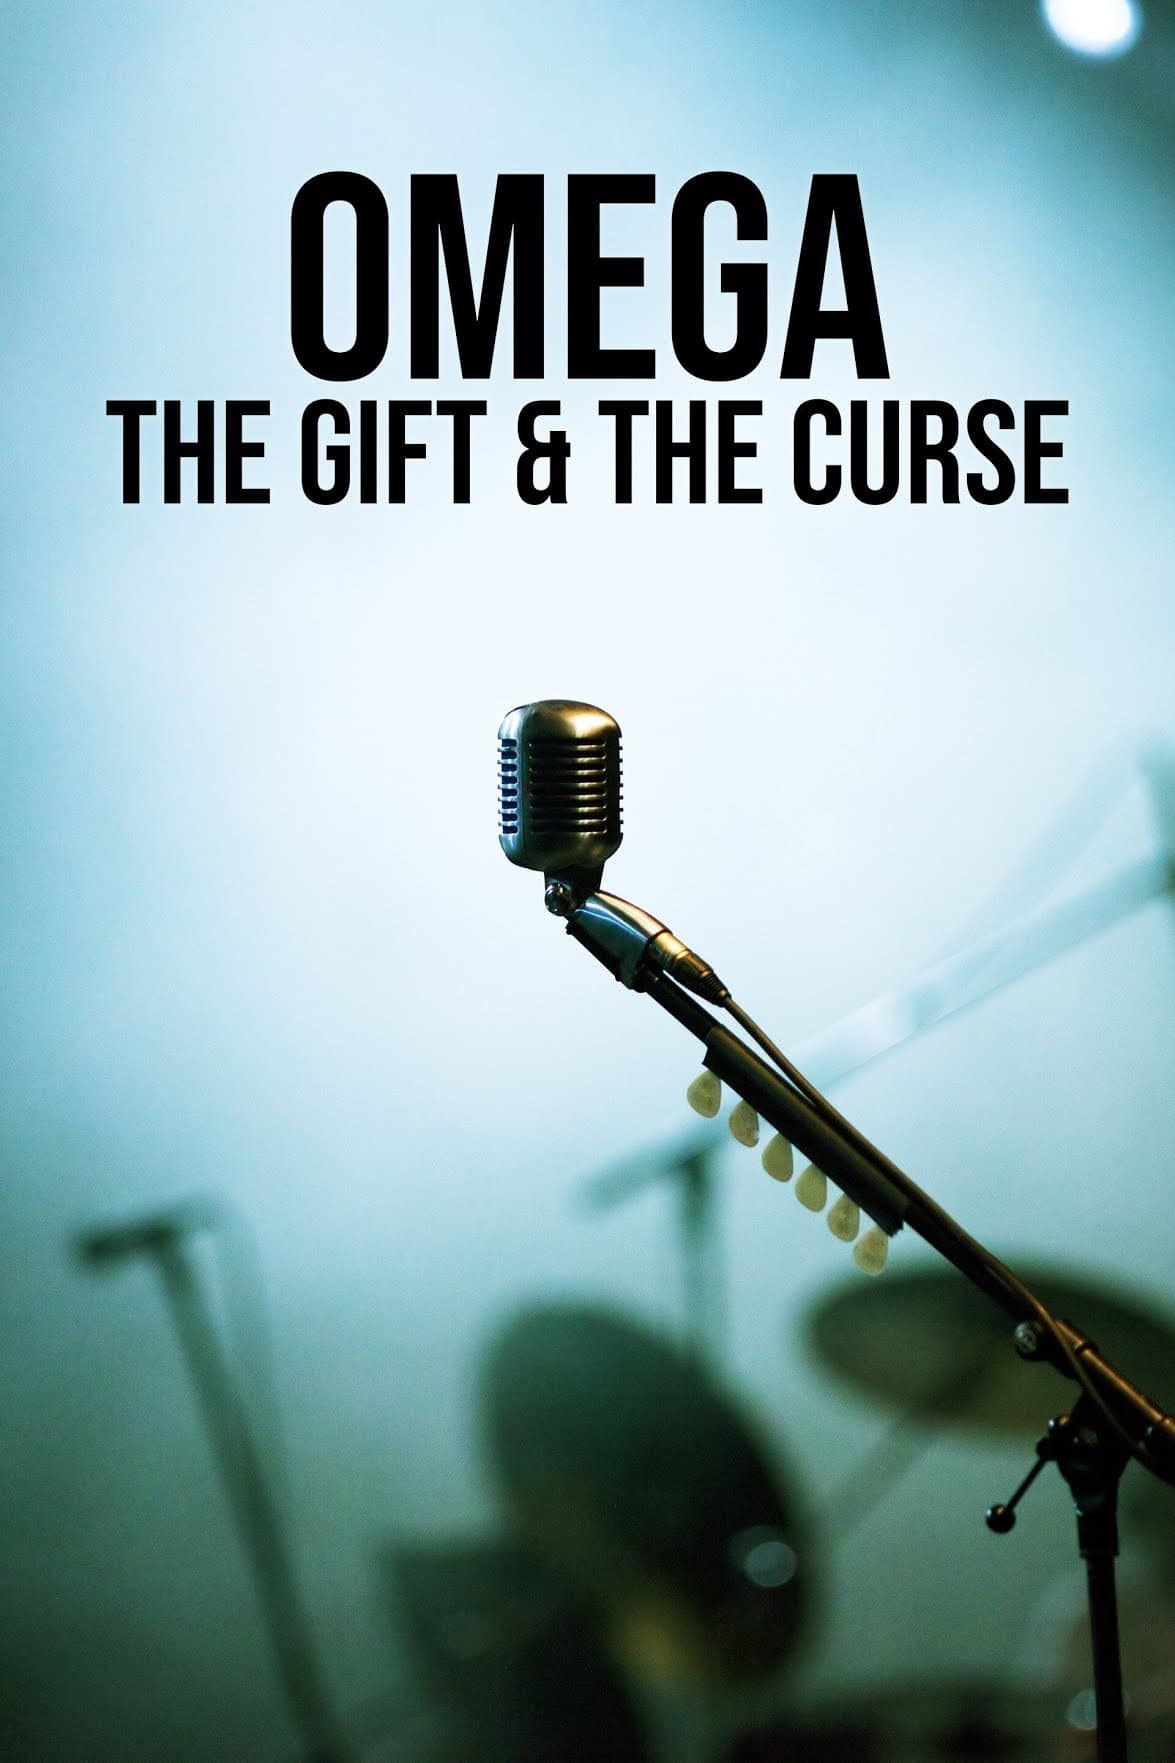 Omega - The Gift and the Curse